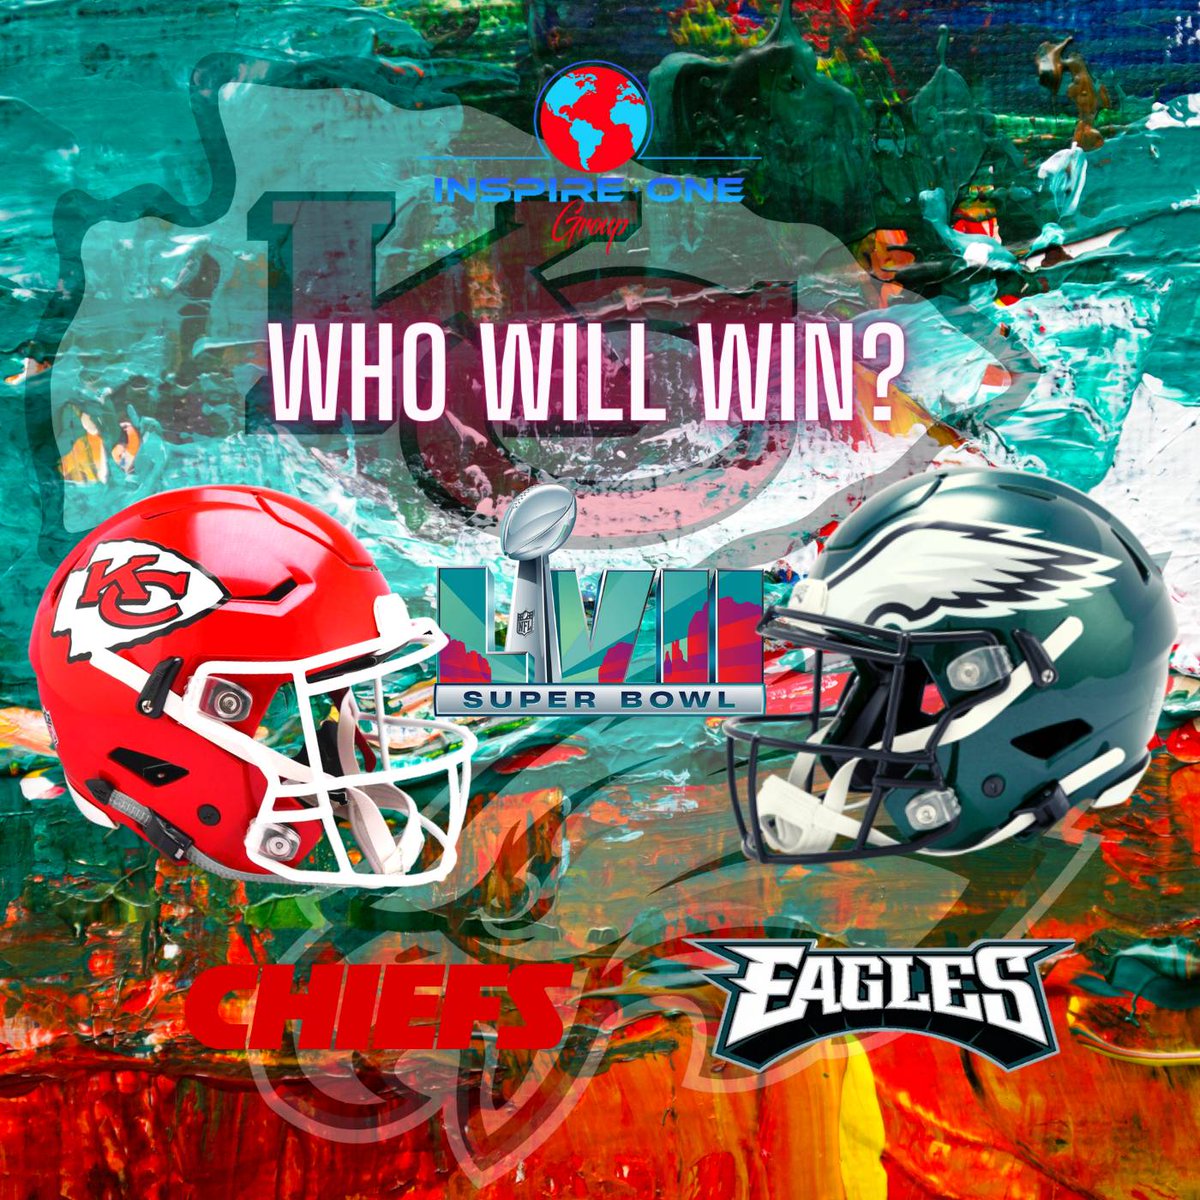 The #SuperBowl is here! 🏈 Will the Philadelphia Eagles or the Kansas City Chiefs come out on top? Who's your pick for the winner? Share your predictions with us using #FlyEaglesFly or #ChiefsKingdom! #inspireone #i1one #inspireonegroup #sby #delmarva #easternshoremd